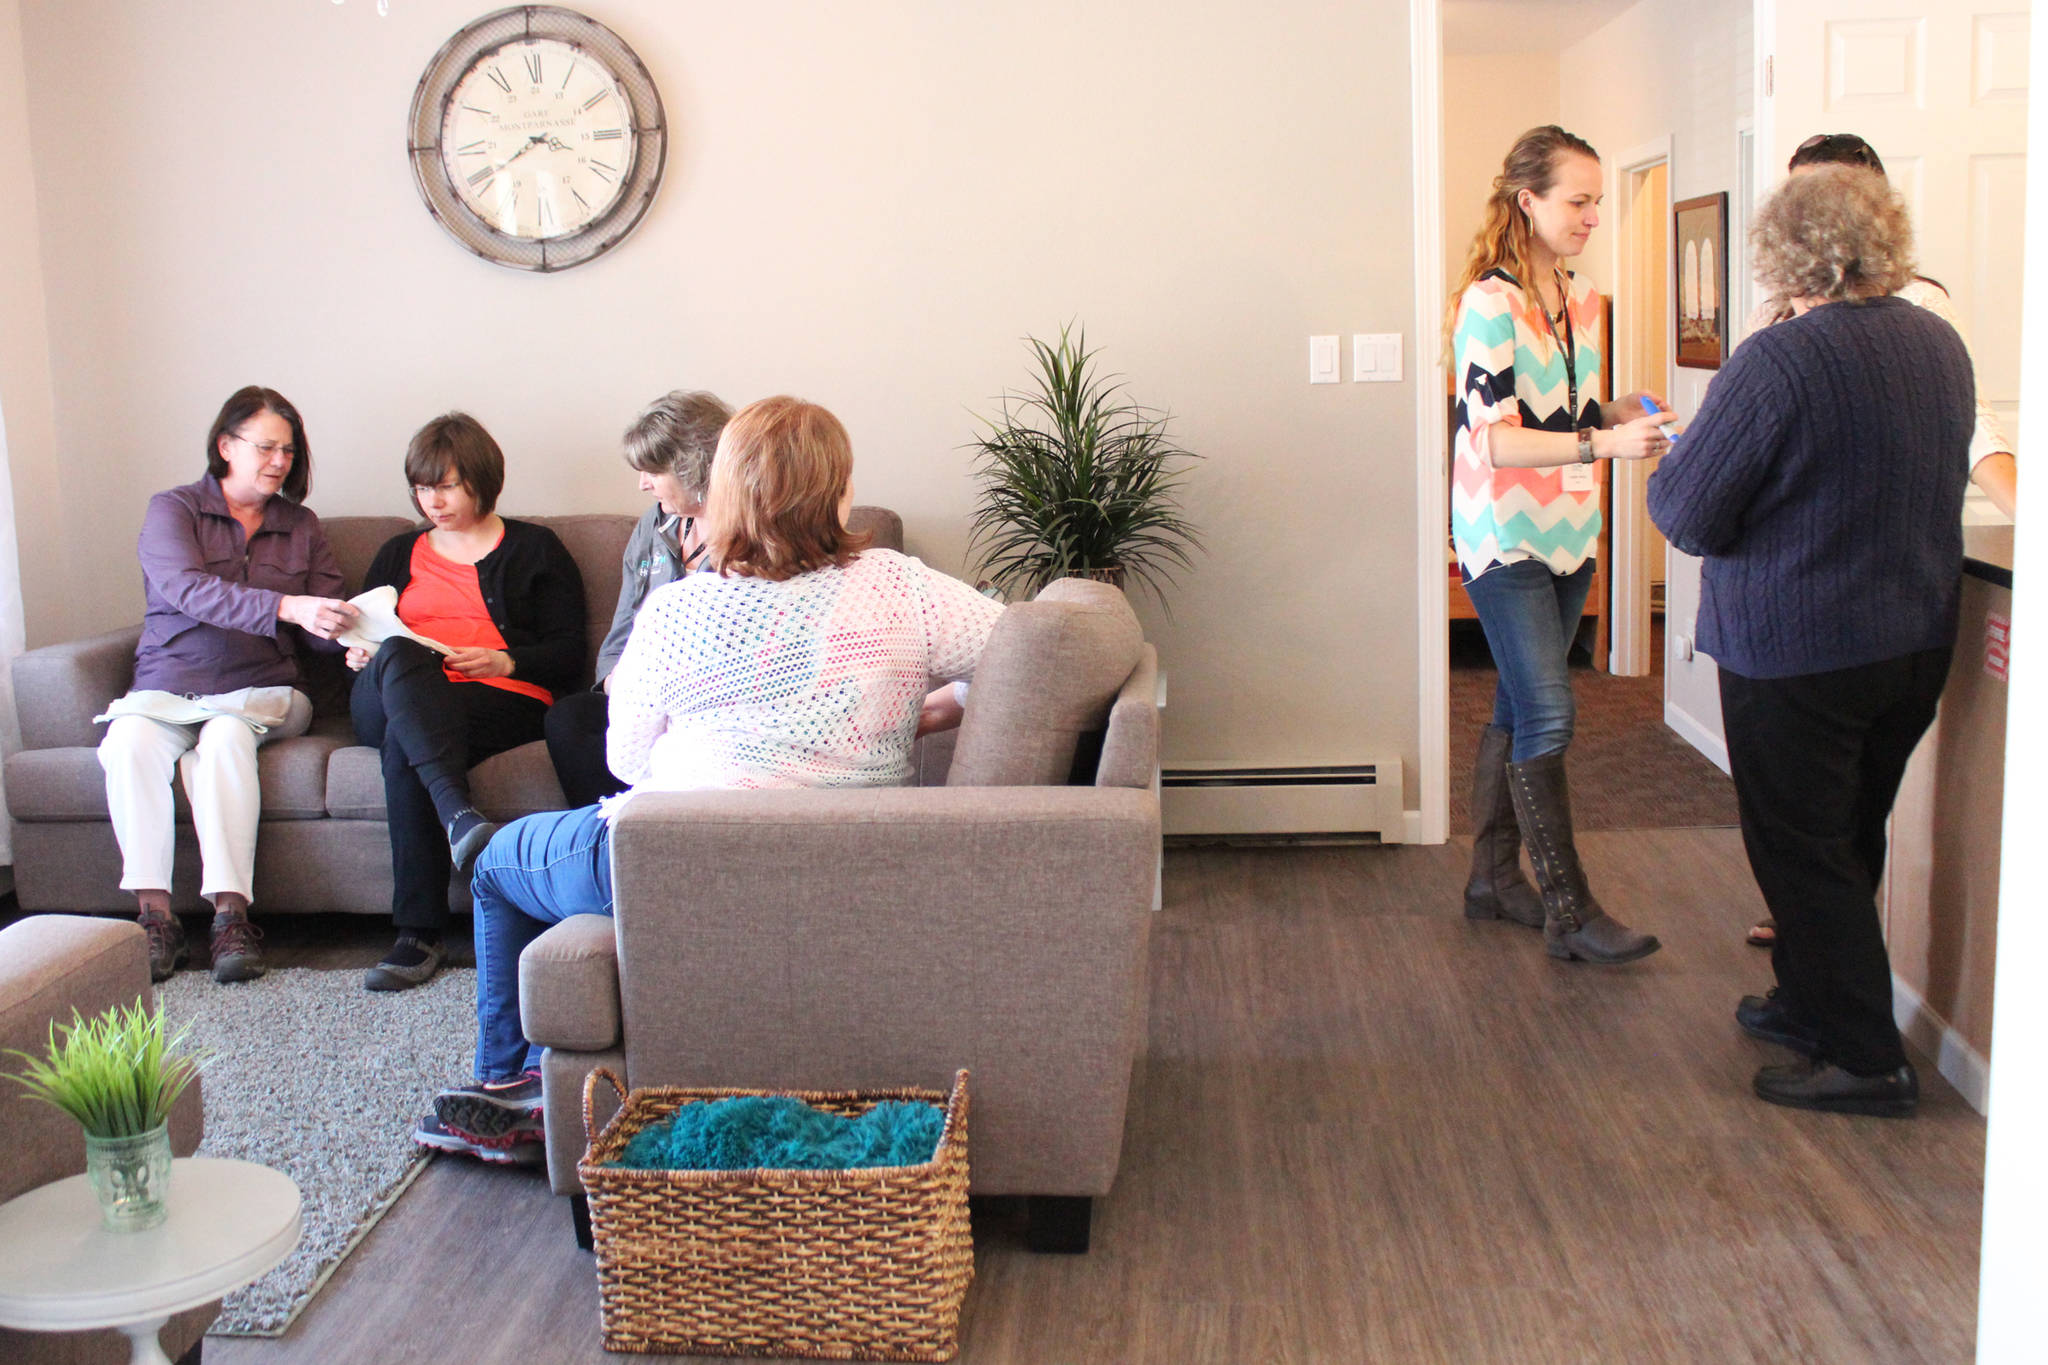 Visitors mingle during an open house for Freedom House, a faith-based sober living home, held Friday, May 5, 2017 in Soldotna, Alaska. The home will accept up to eight women at a time into a nine-month program to help in their recovery. (Megan Pacer/Peninsula Clarion)